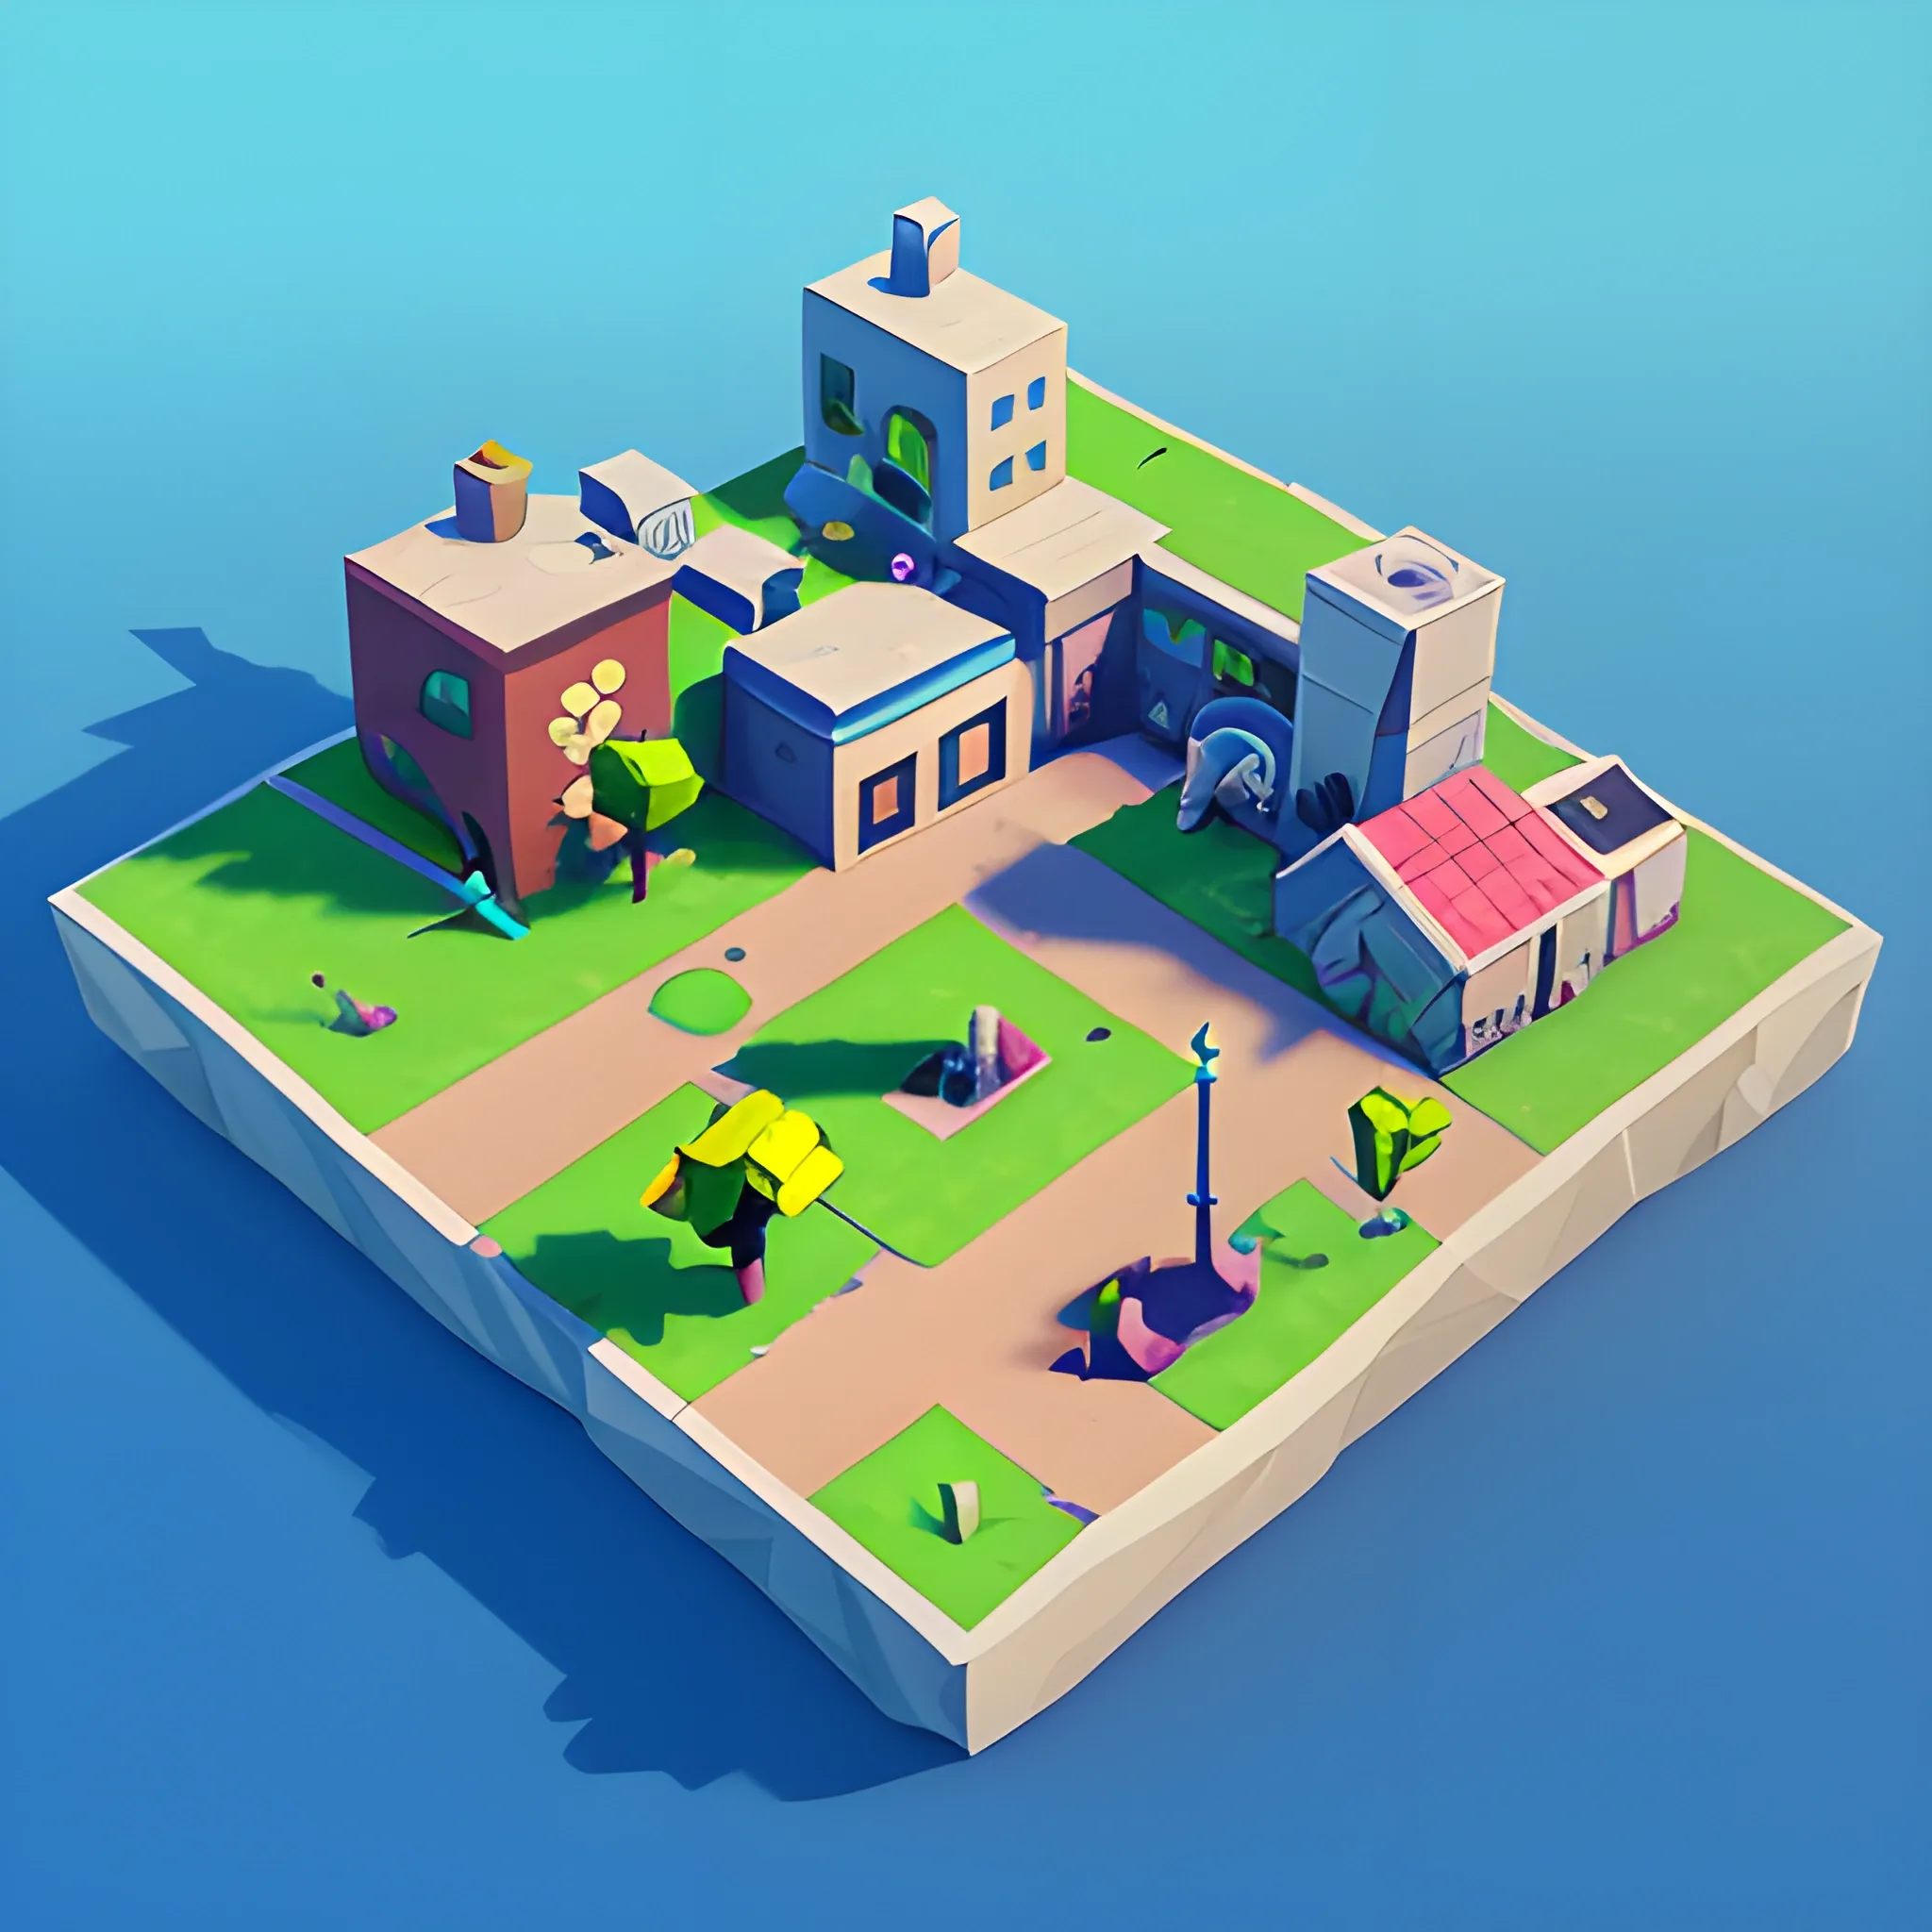 The gameplay of a videogame, 2000's vibes, low poly, 3d, environmental care game 